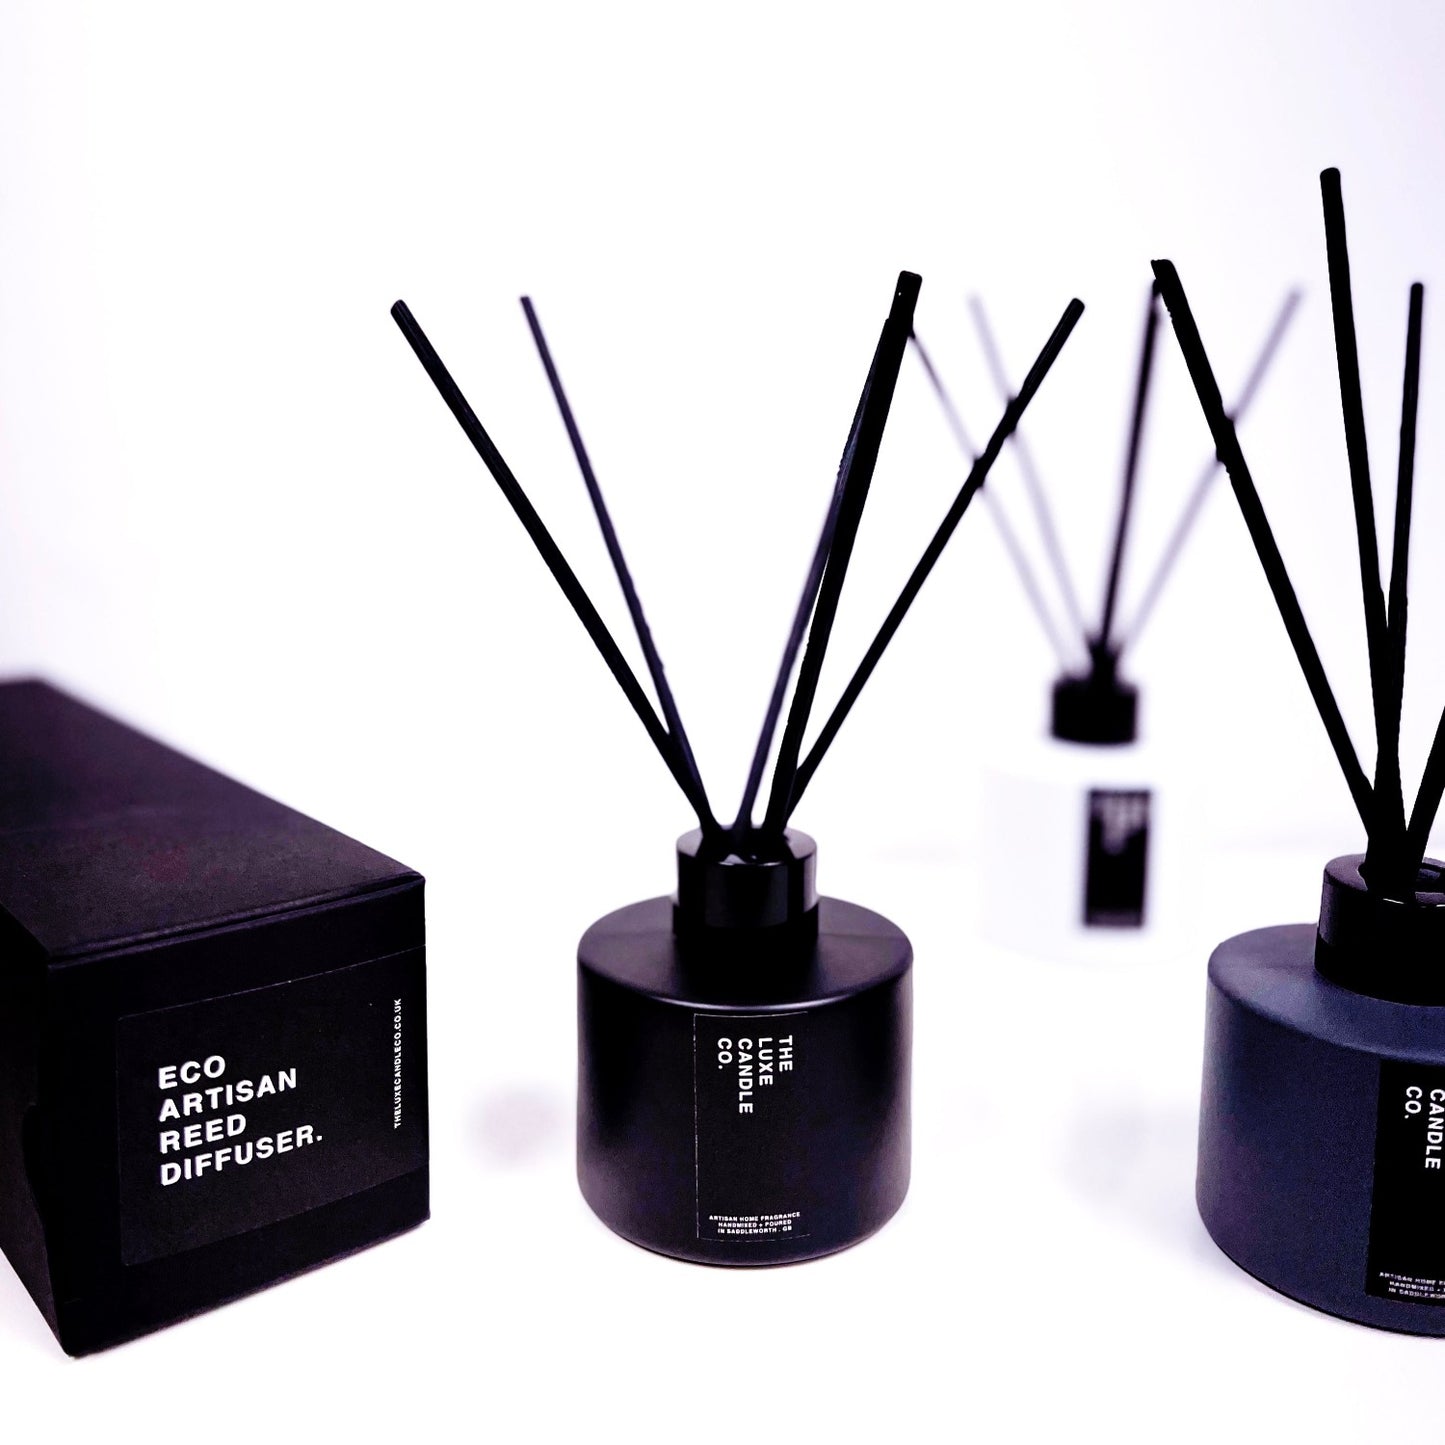 Eco artisan reed diffusers by The Luxe Candle Co